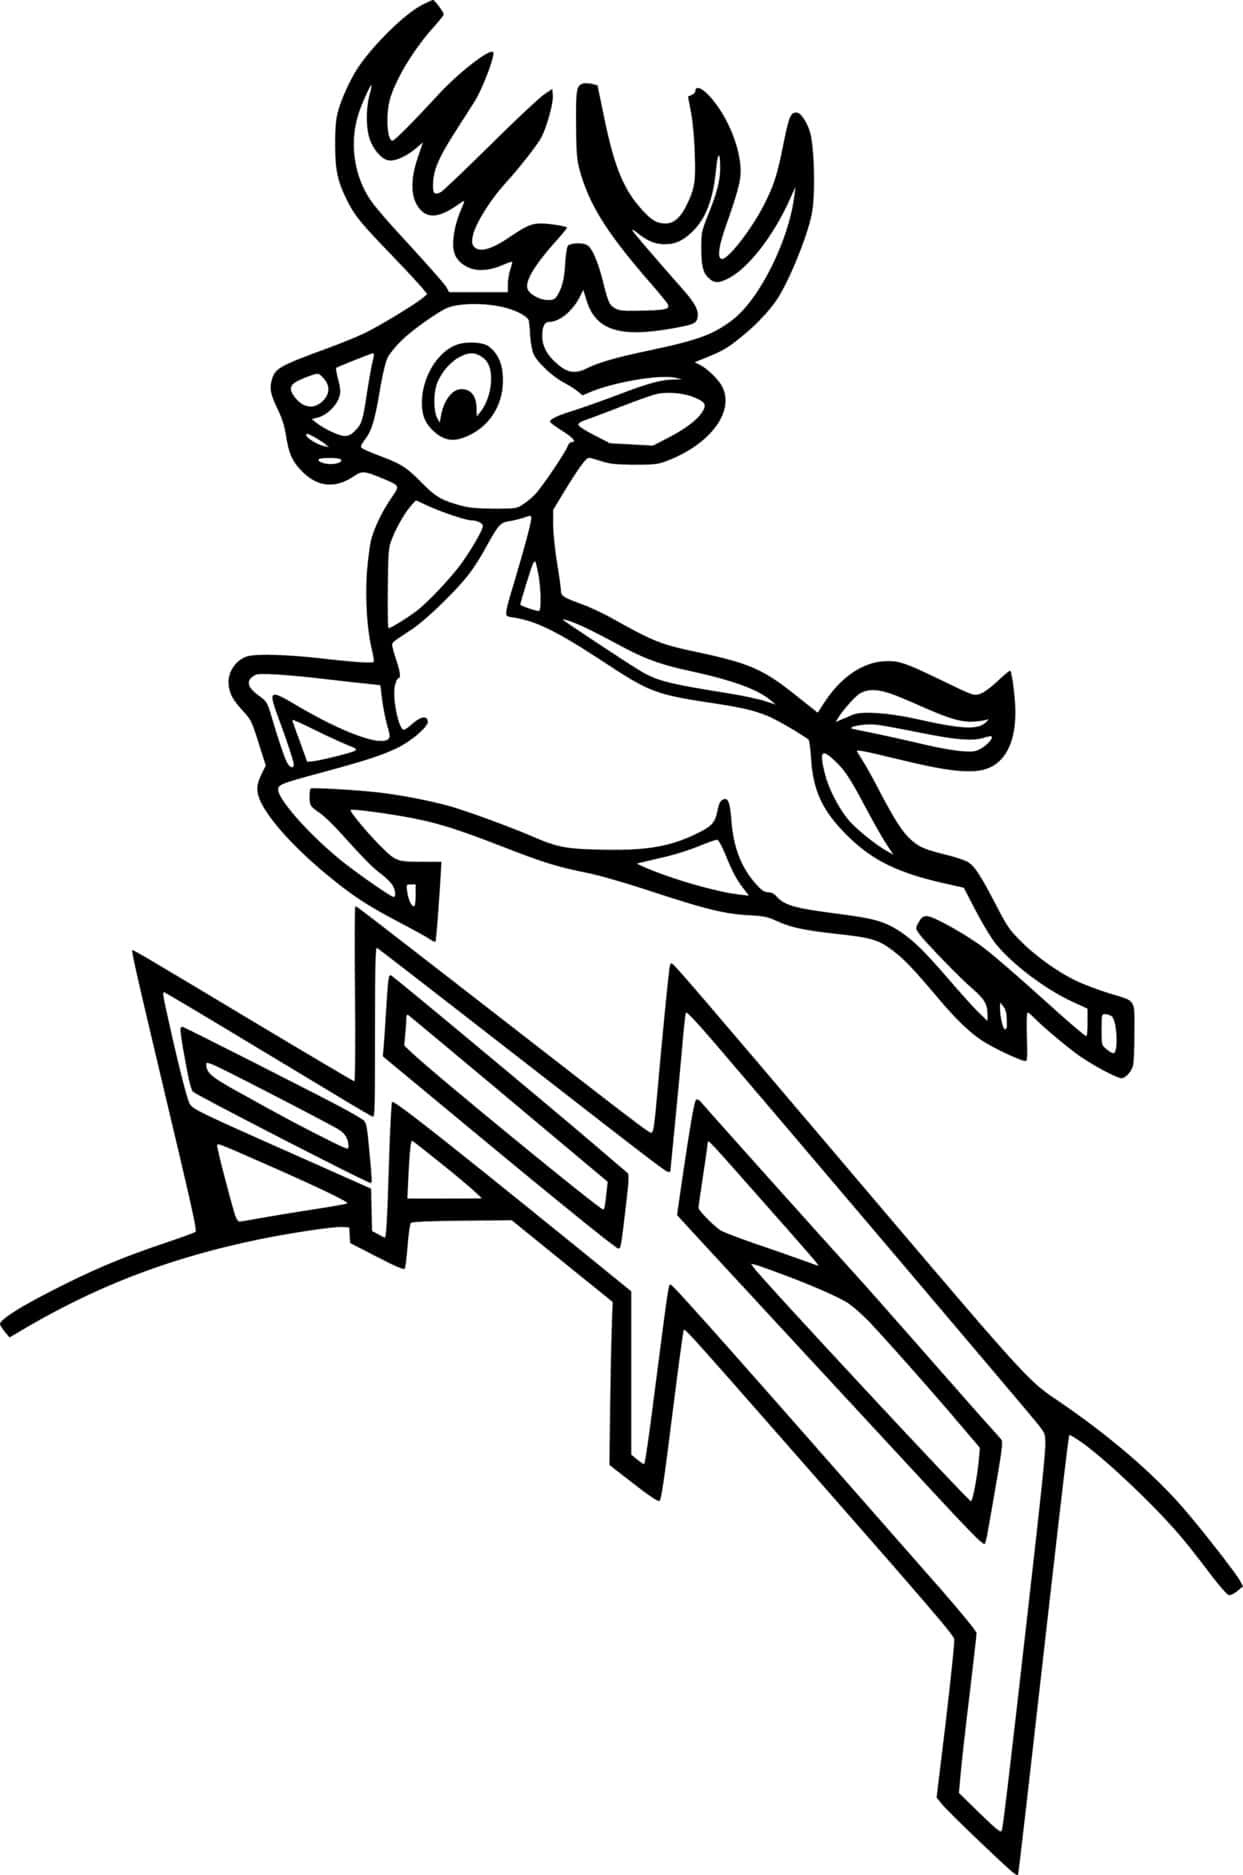 Deer Jumping Over The Fence Coloring Page